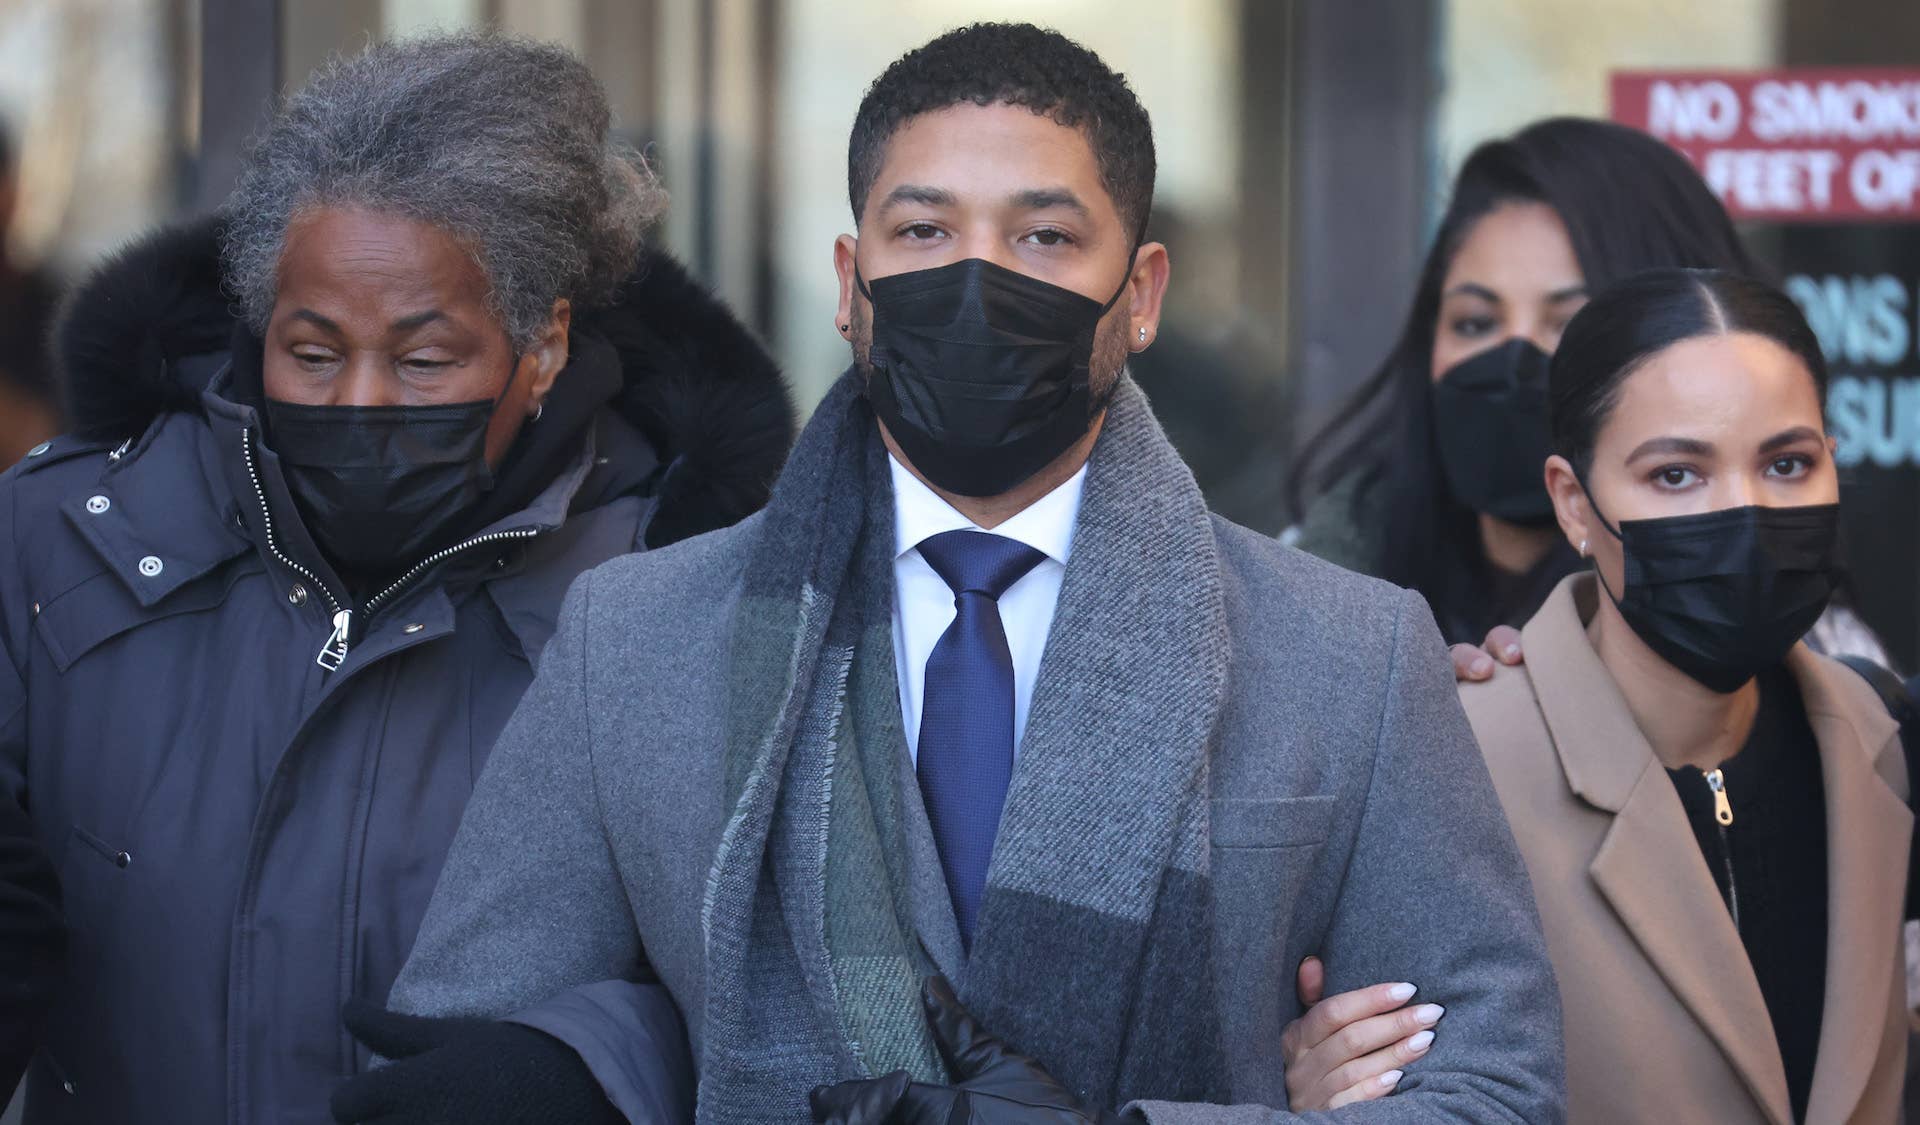 Jussie Smollett leaves the Leighton Criminal Courts Building as the jury begins deliberation during his trial